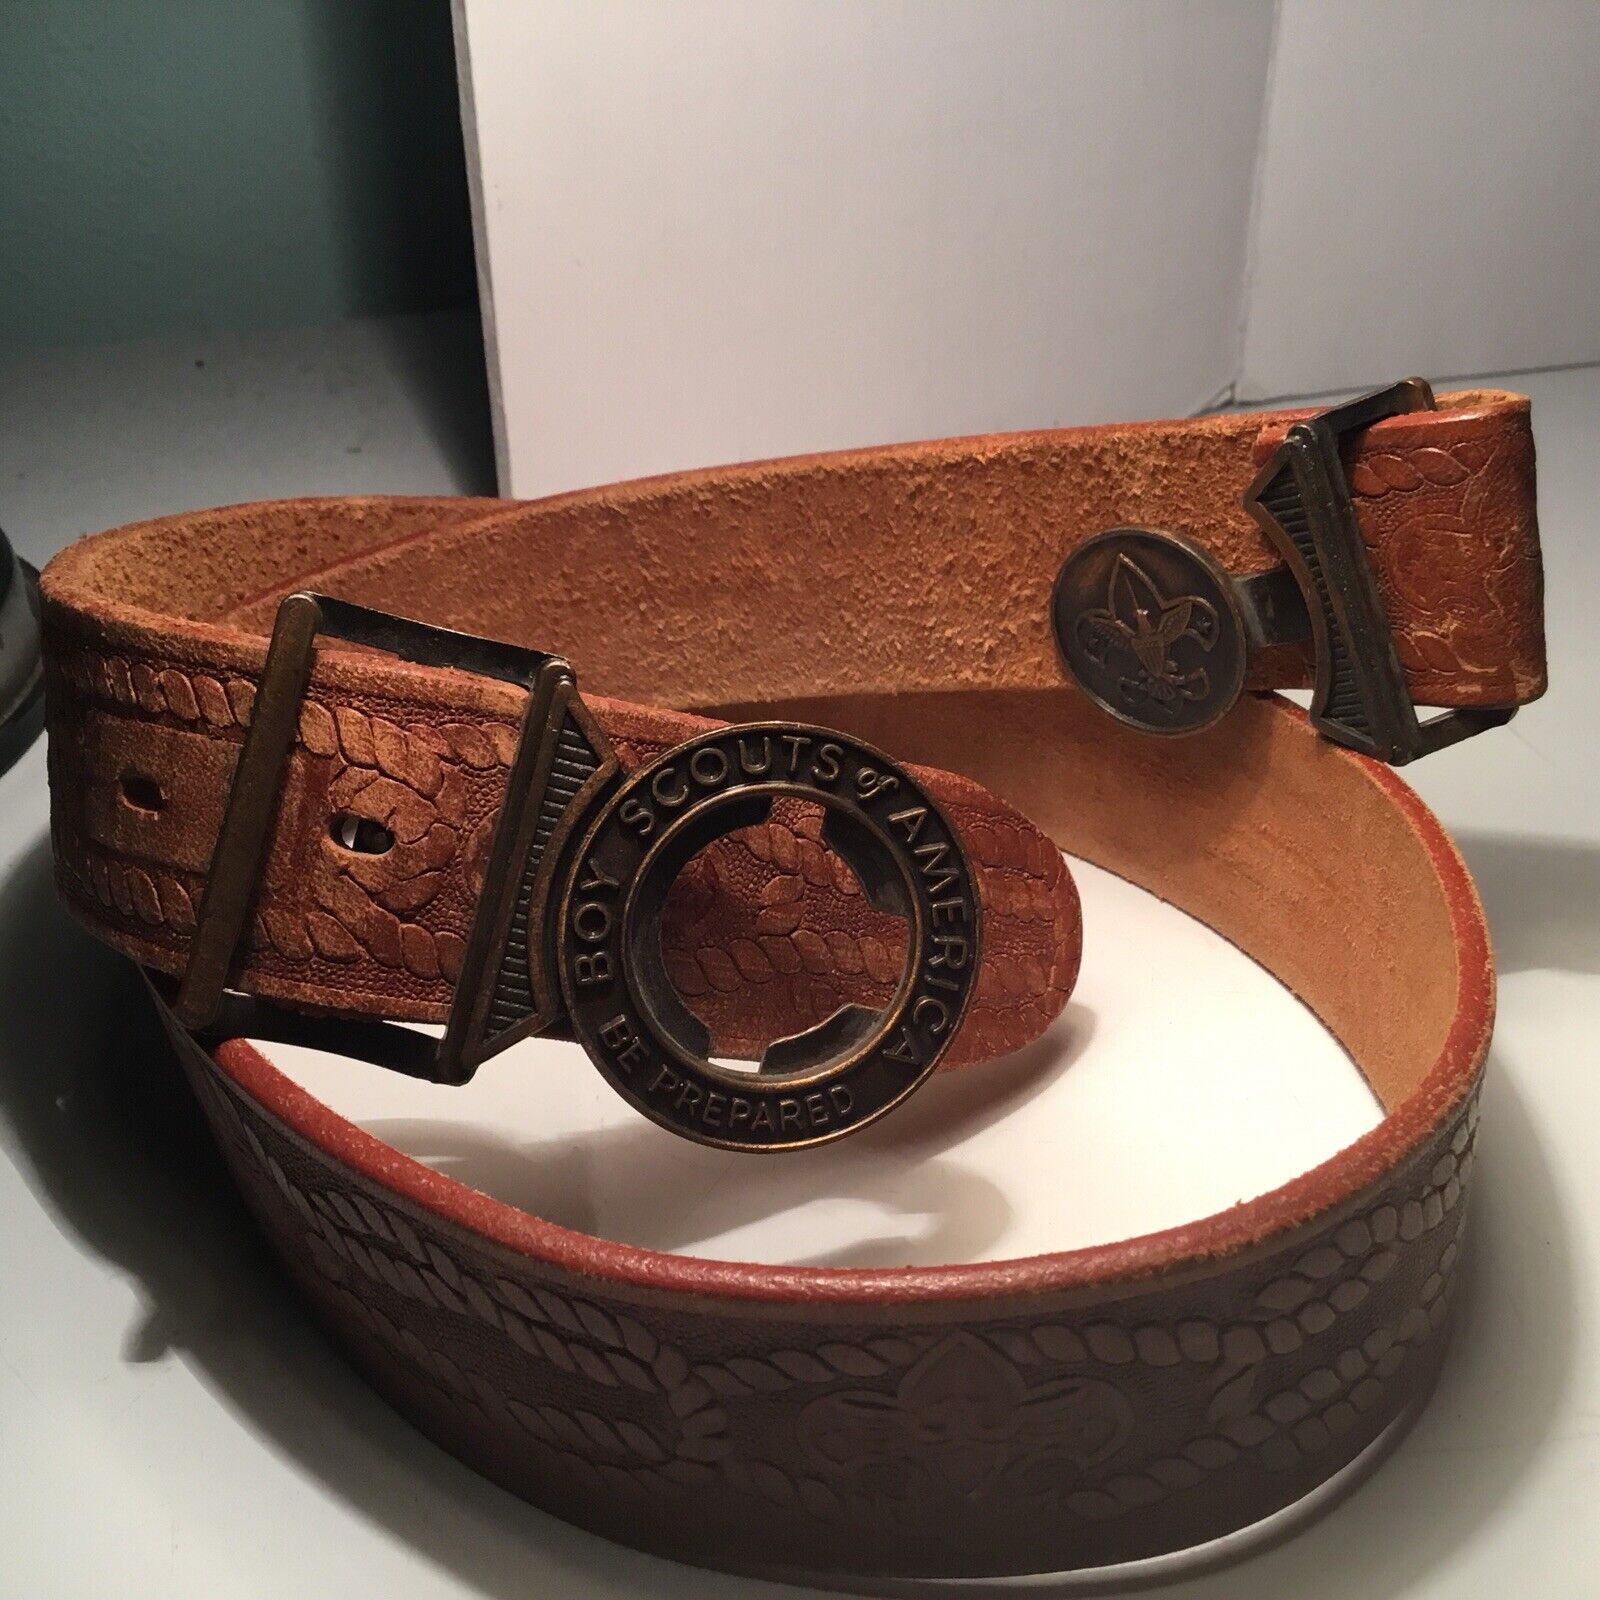 VINTAGE BSA BOY SCOUTS OF AMERICA TOOLED LEATHER BELT SIZE 32 LOCKING 2 PC BUCKL